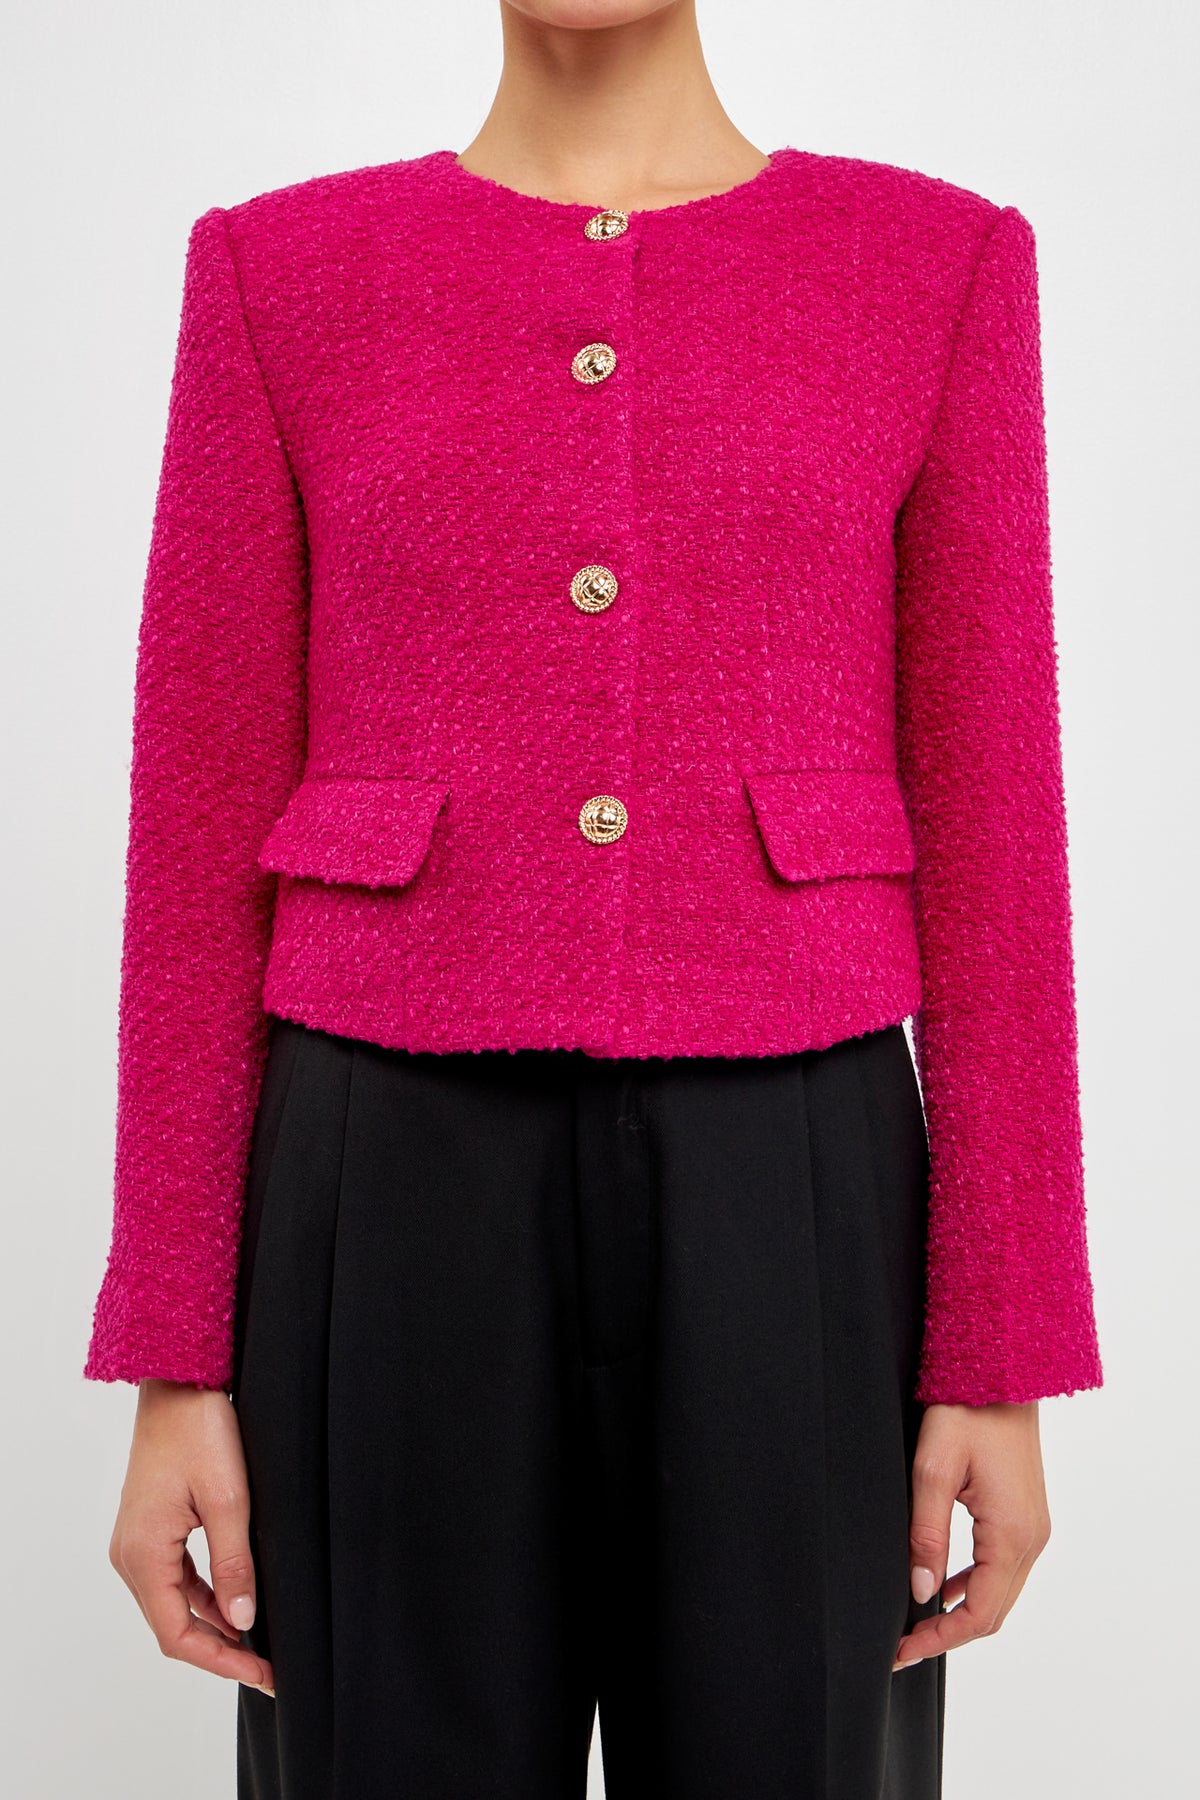 ENDLESS ROSE-Bouclé Jacket-JACKETS available at Objectrare